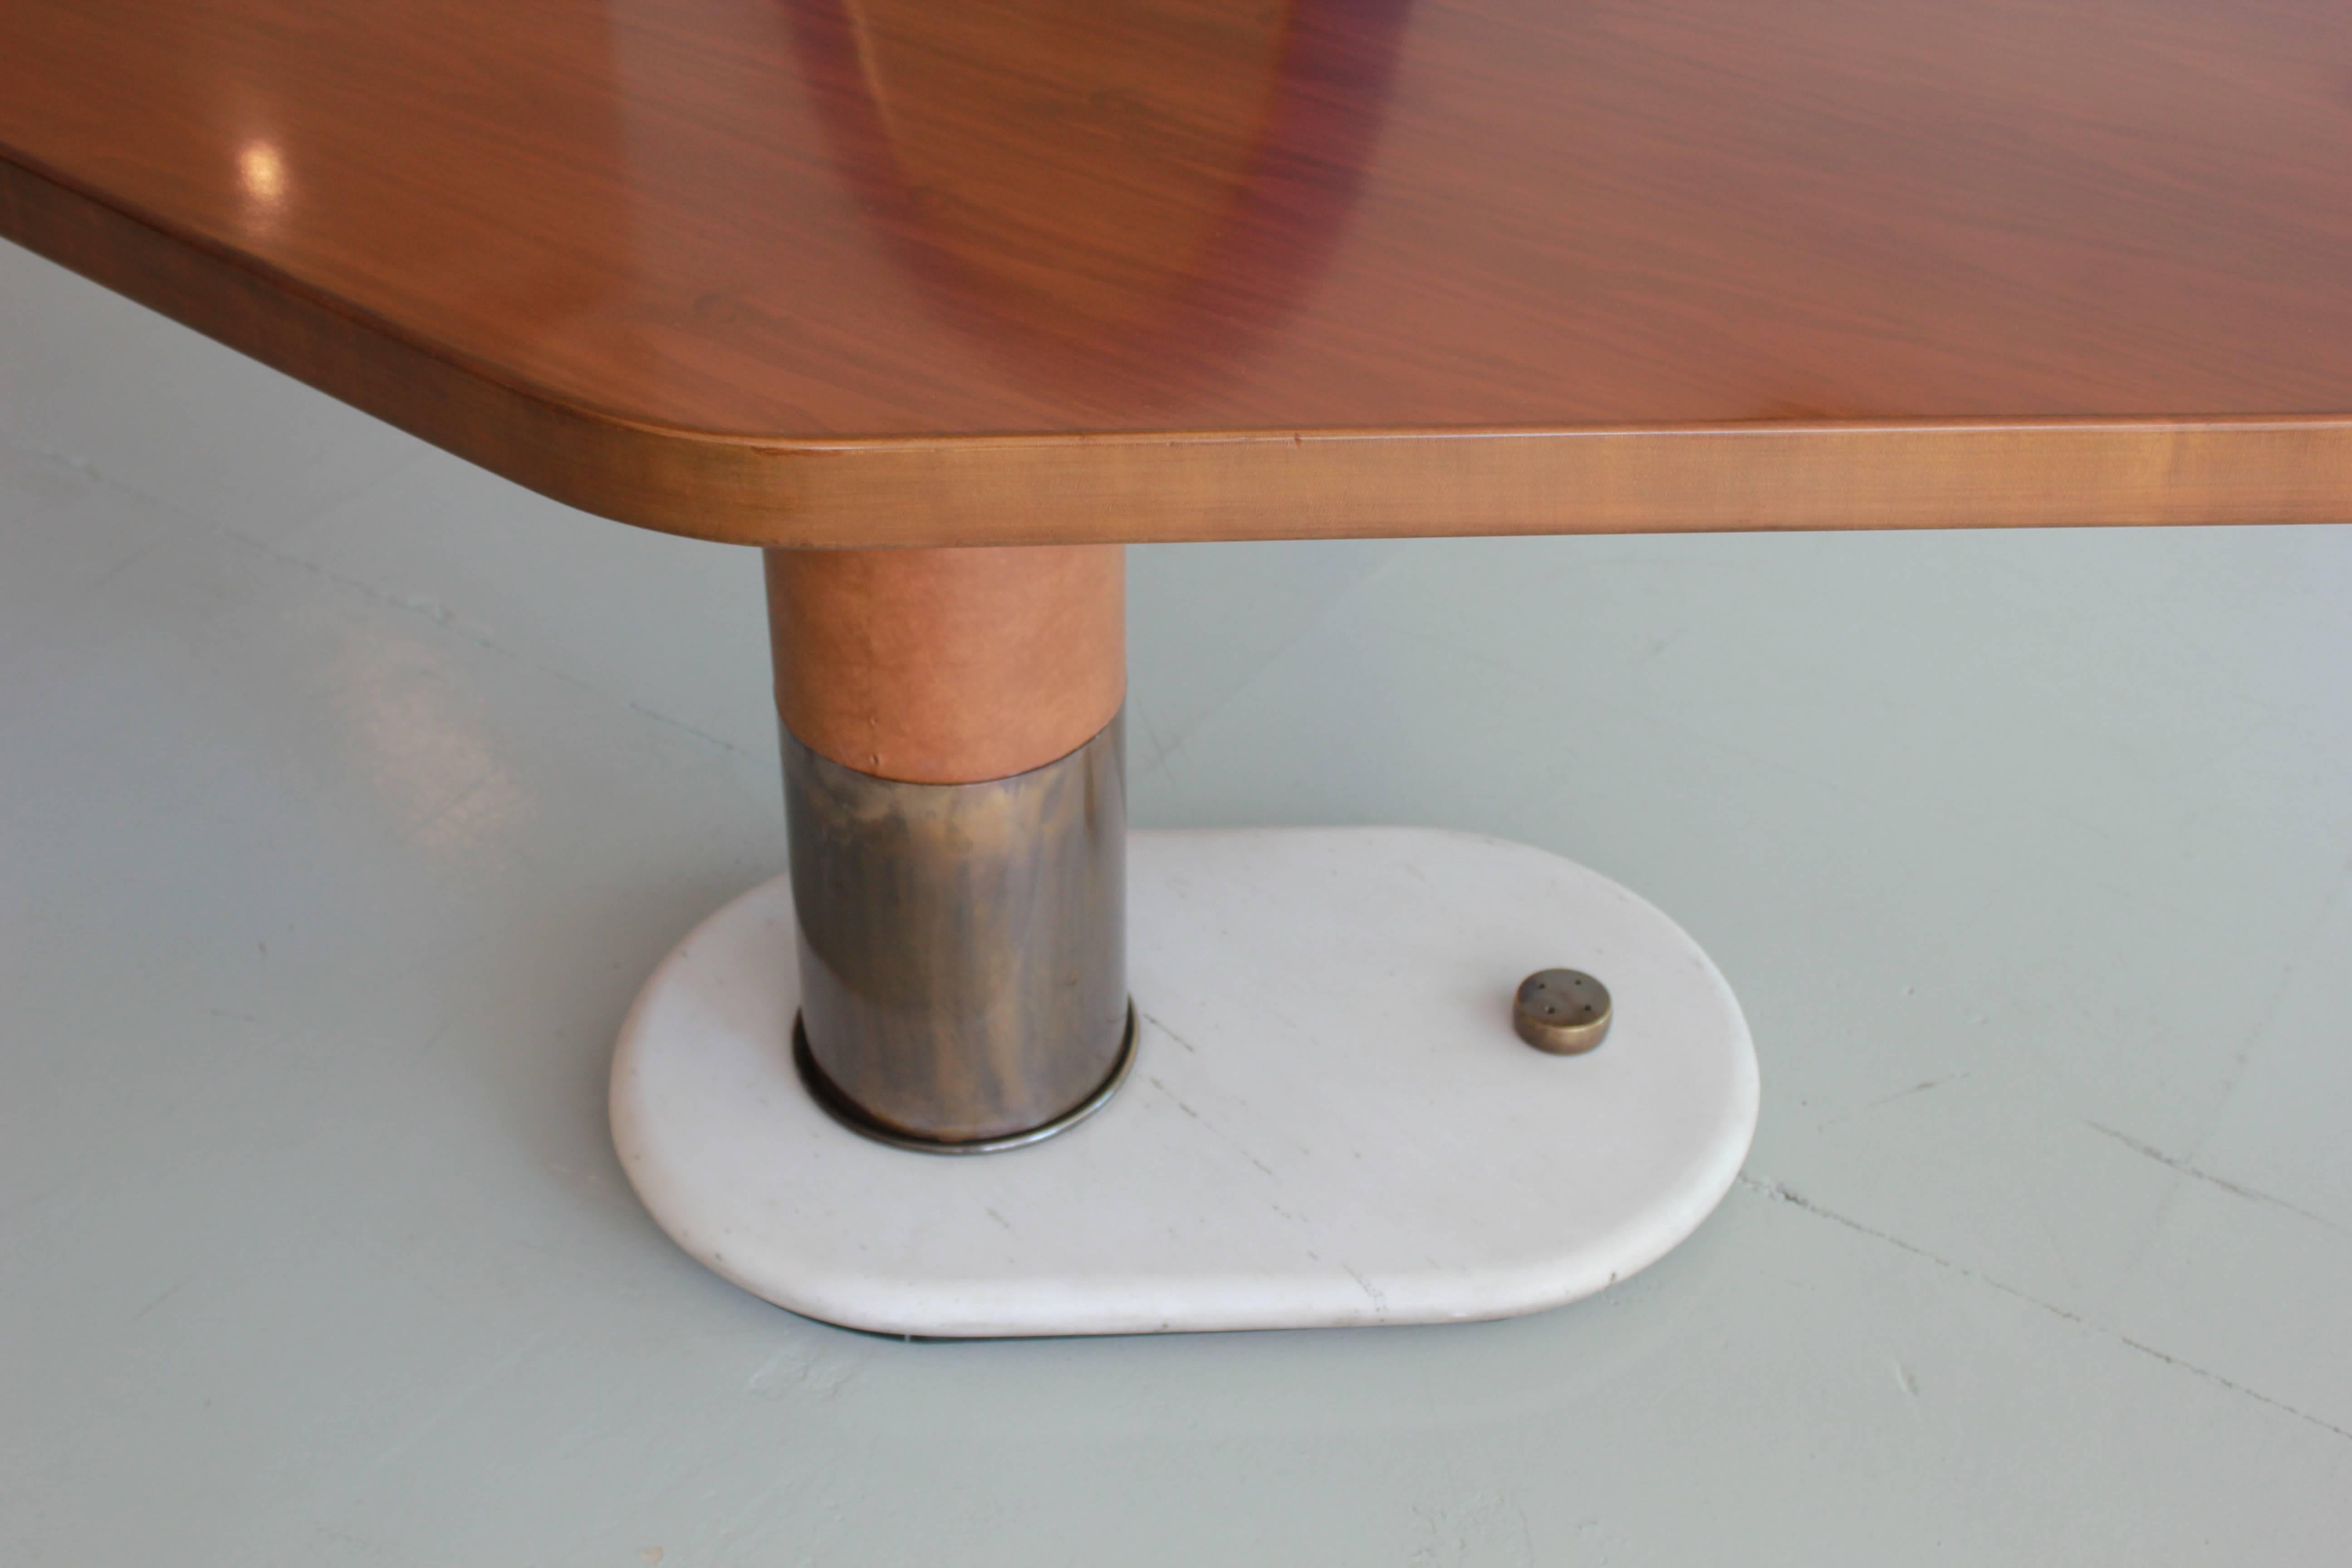 An incredible Italian desk attributed to Gio Ponti with an asymmetrical walnut top over an off-centered cylindrical bronze pedestal wrapped in caramel colored leather. 
Solid marble base has bronze trim. 
Massive in scale and truly unique piece.